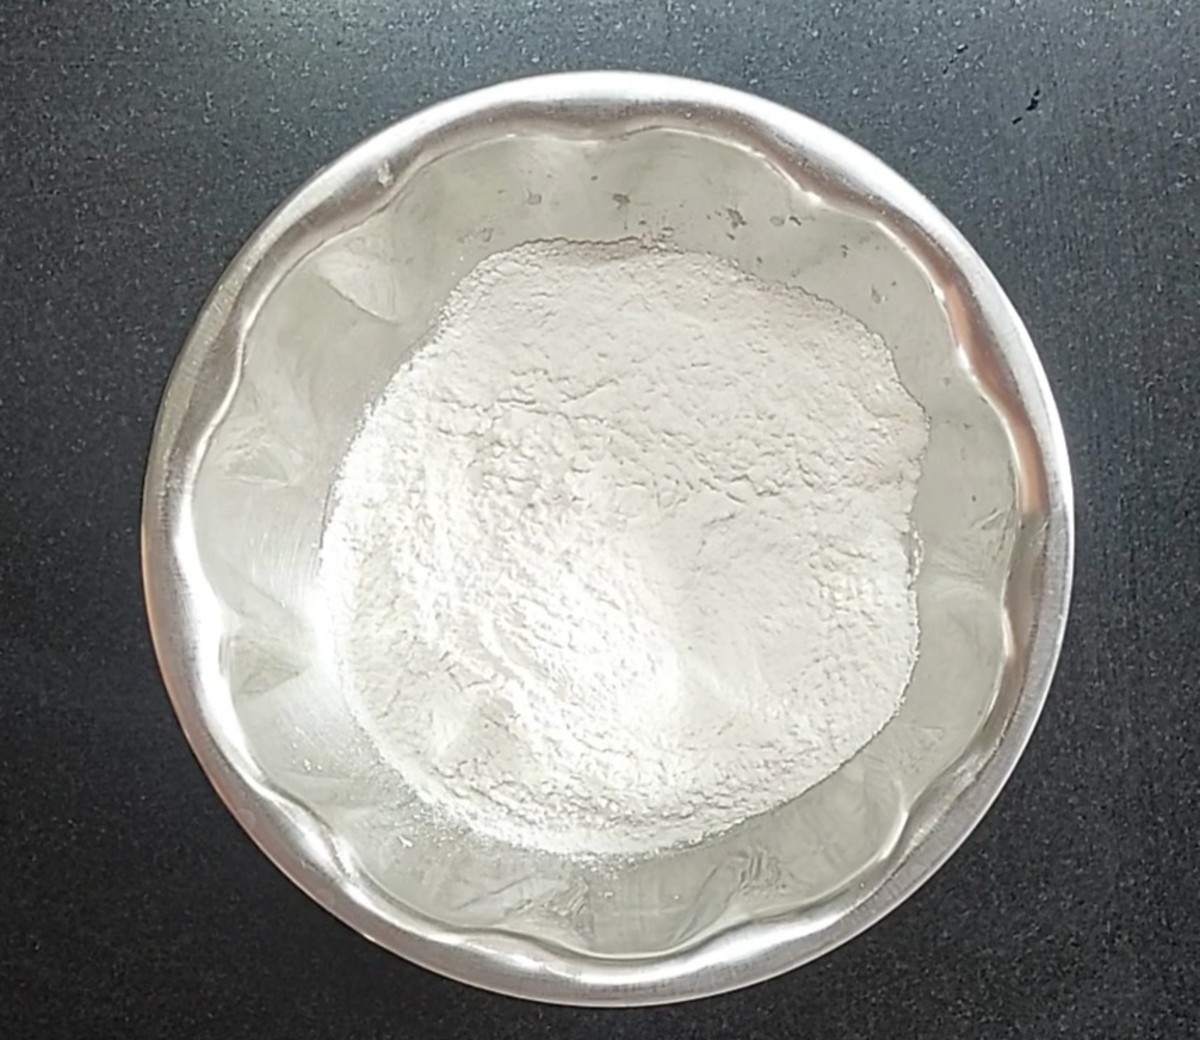 In a wide vessel, take 1 cup of rice flour.